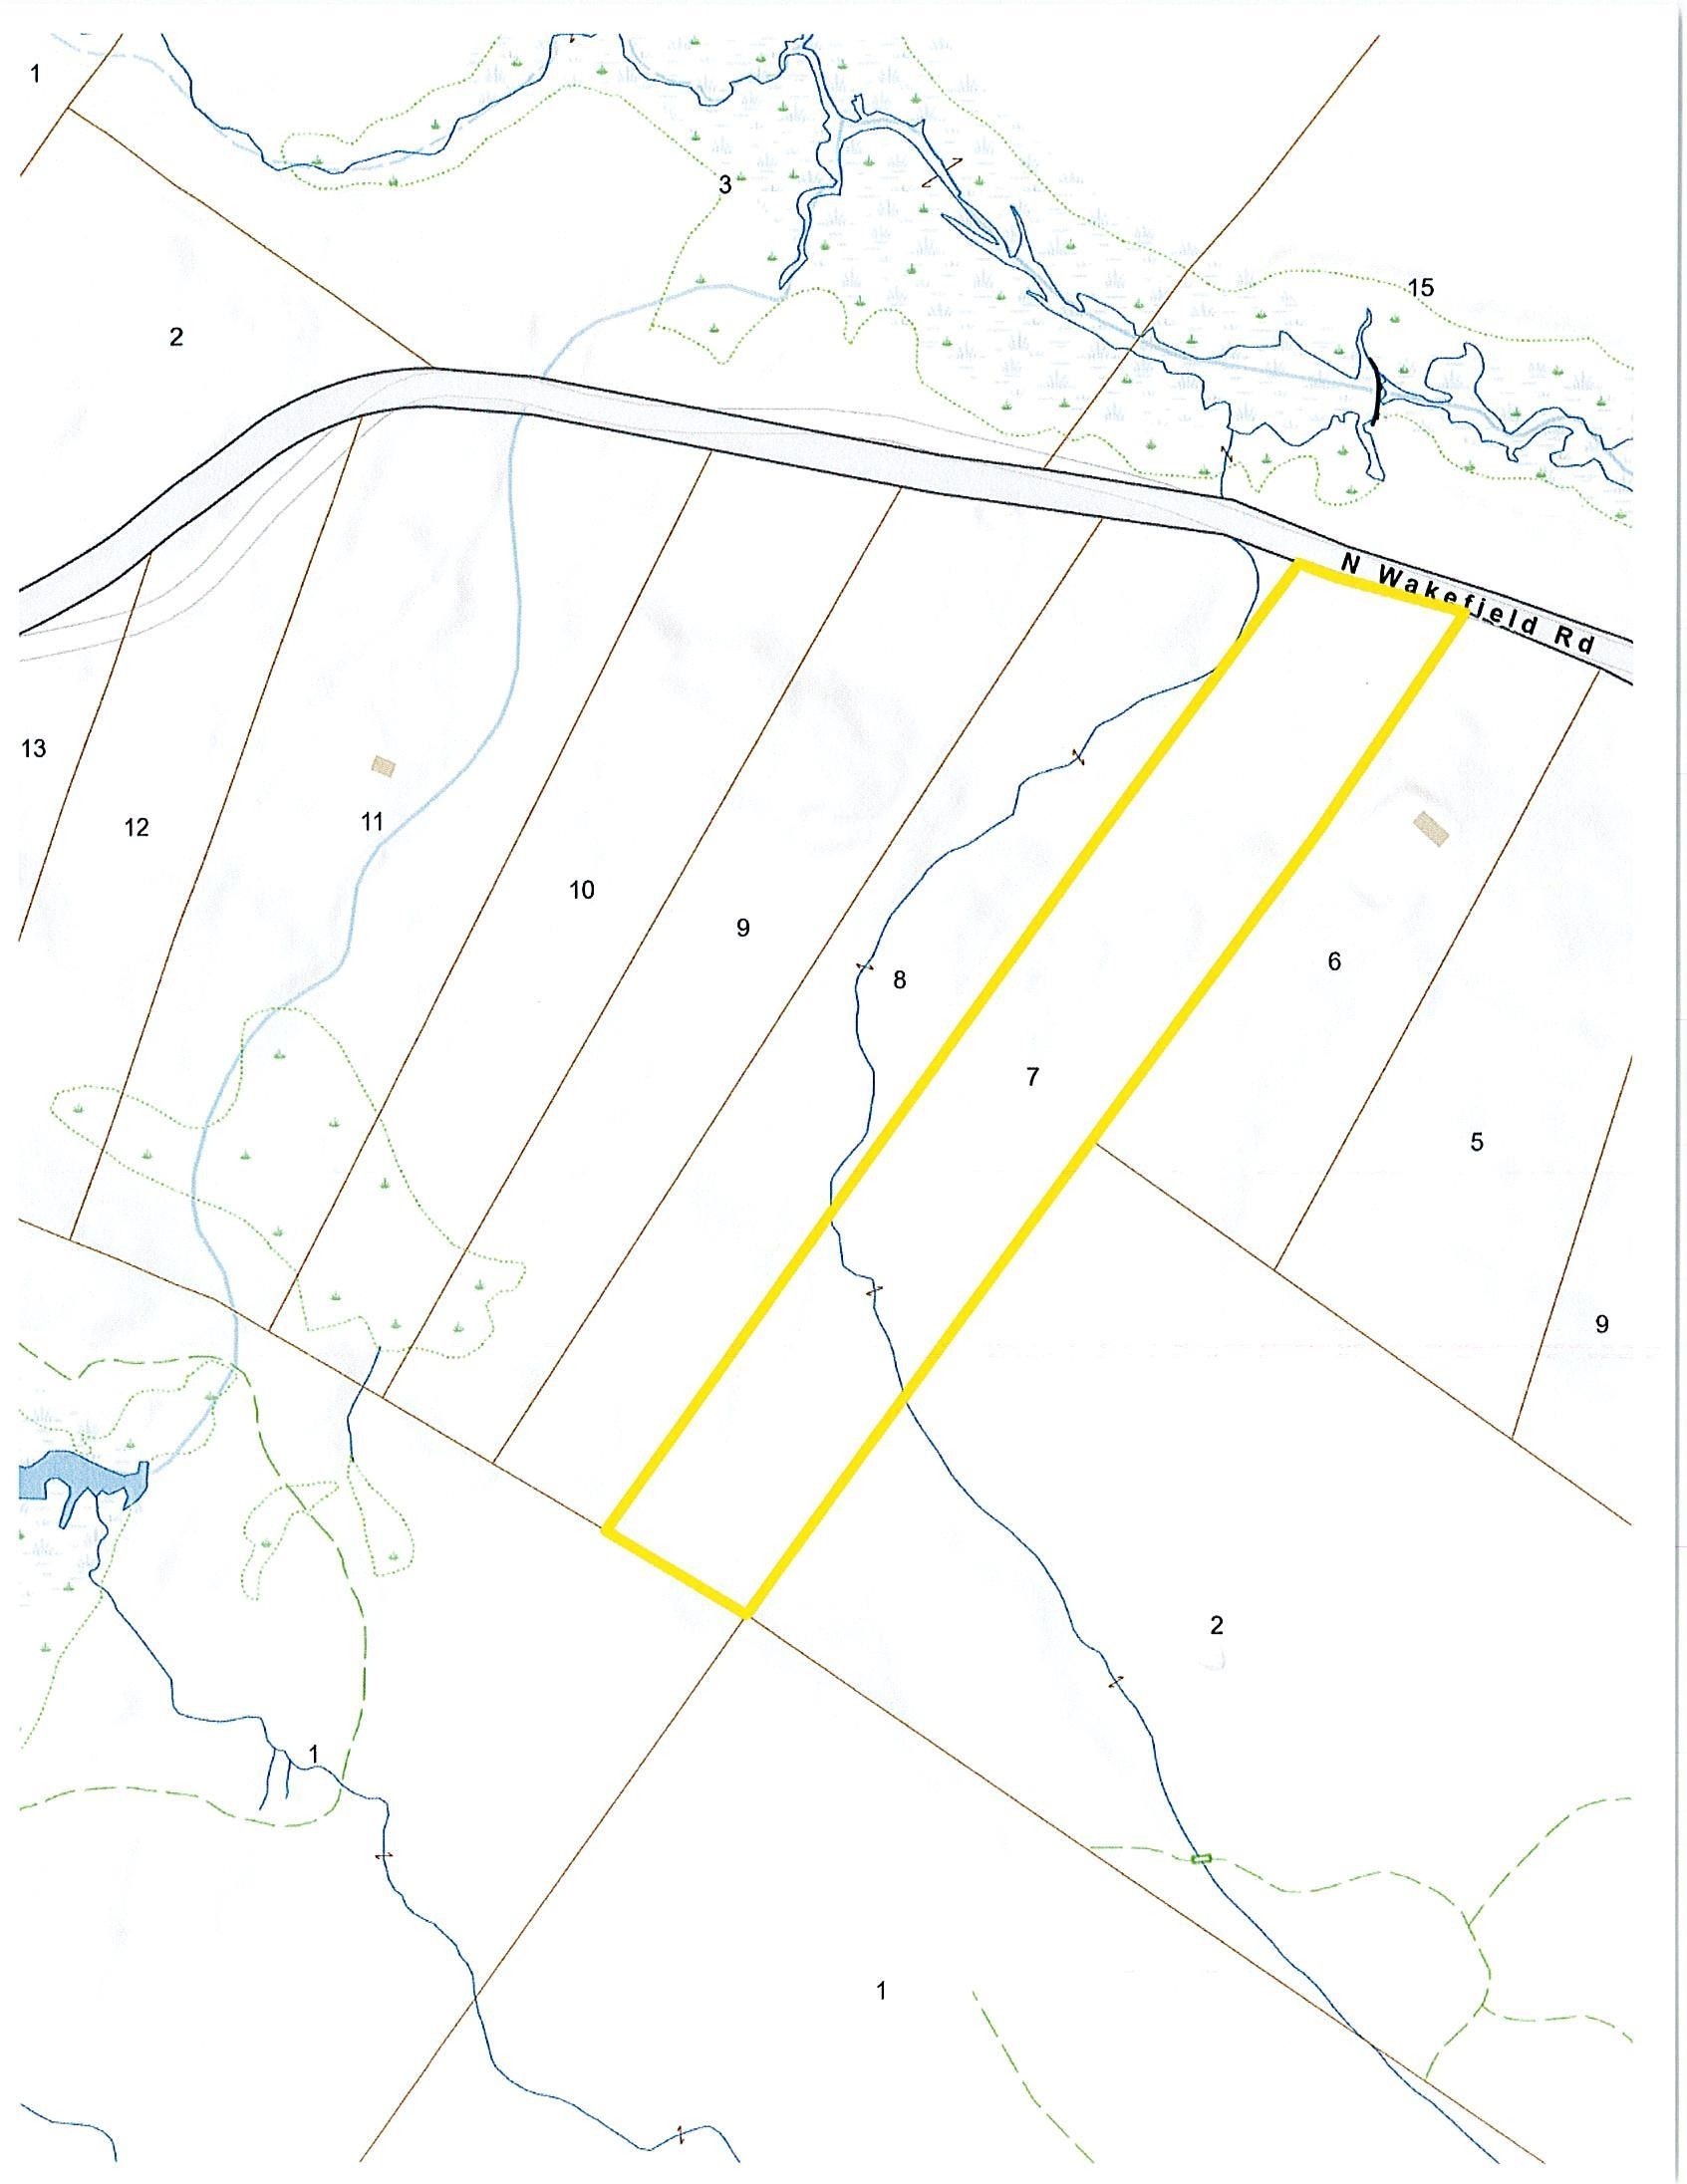 1. Map 92, Lot 7 North Wakefield Road